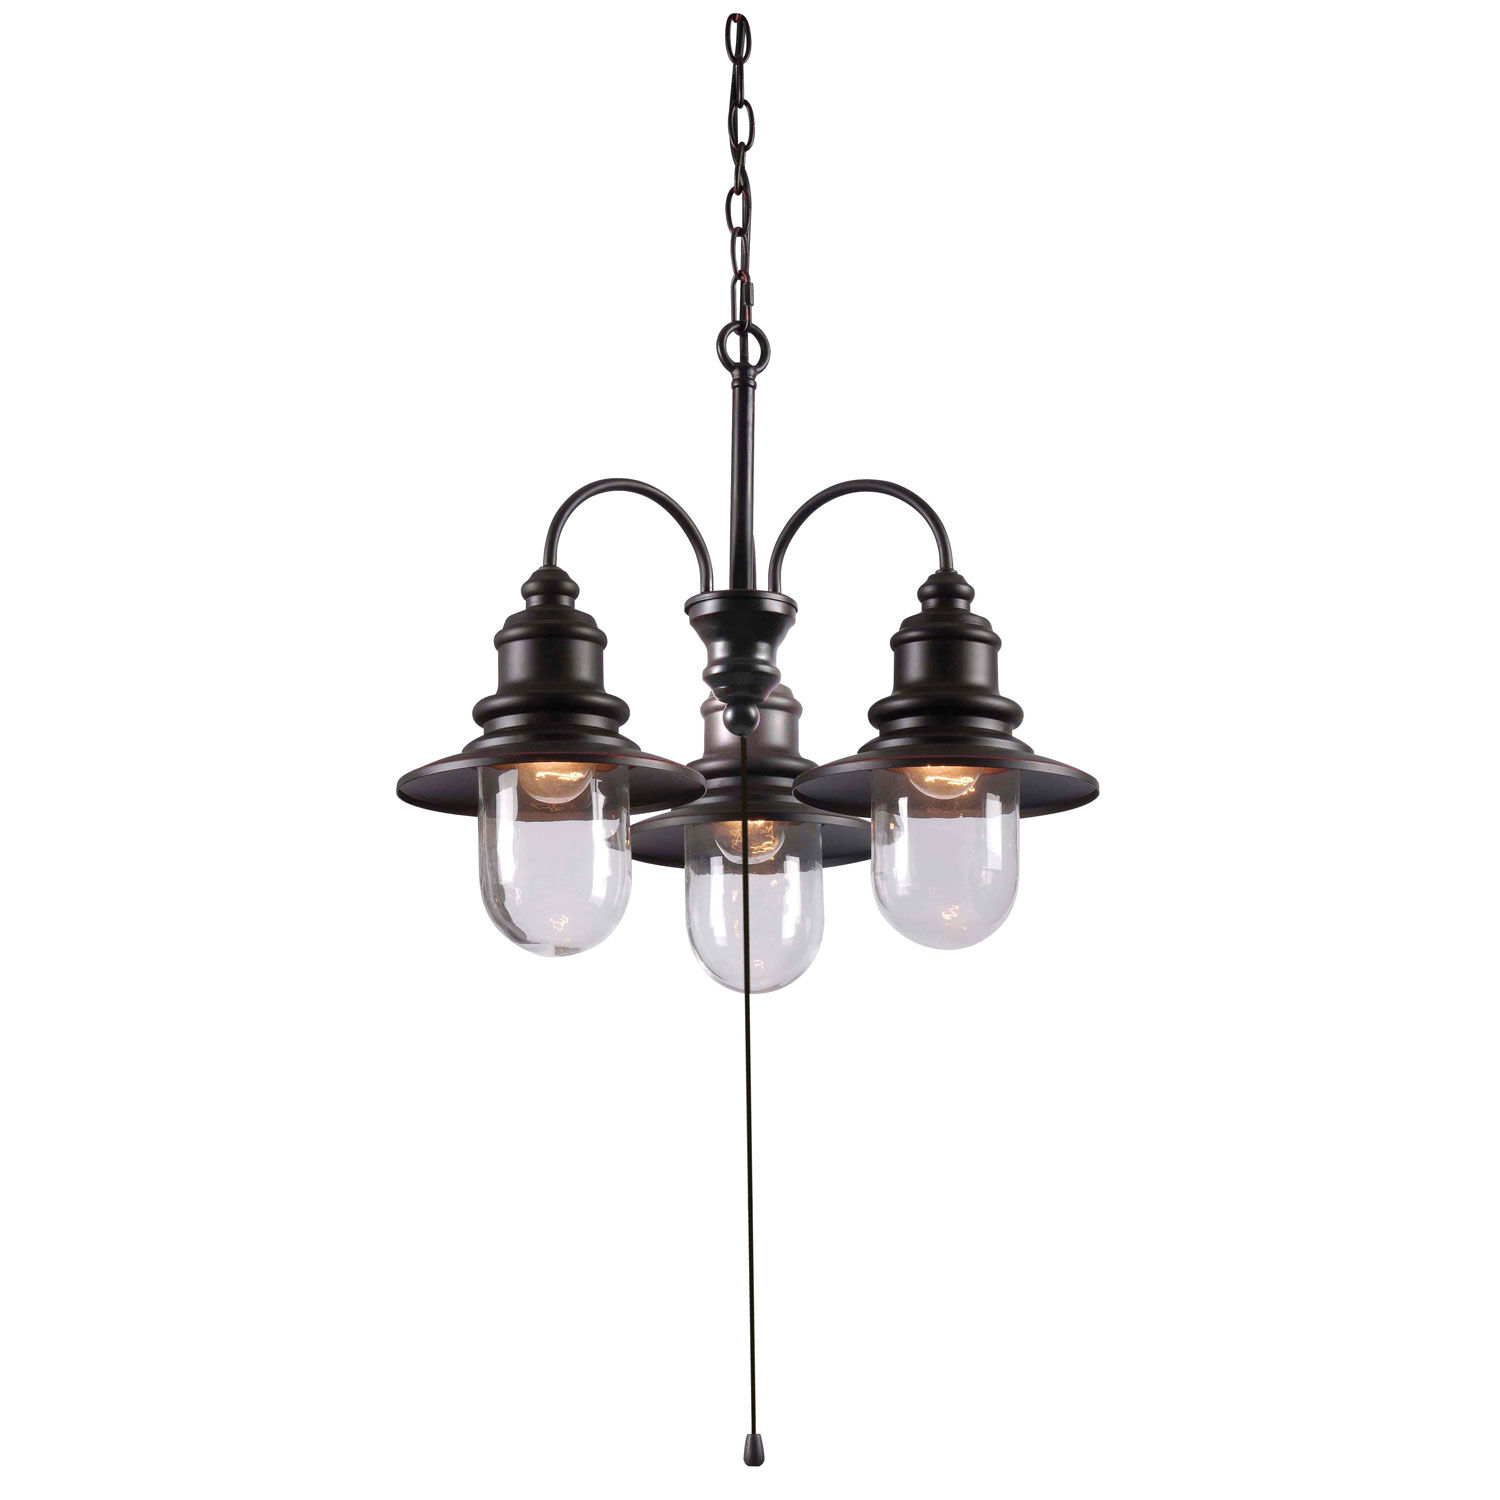 Kenroy Home Broadcast Oil Rubbed Bronze Single Light Outdoor 